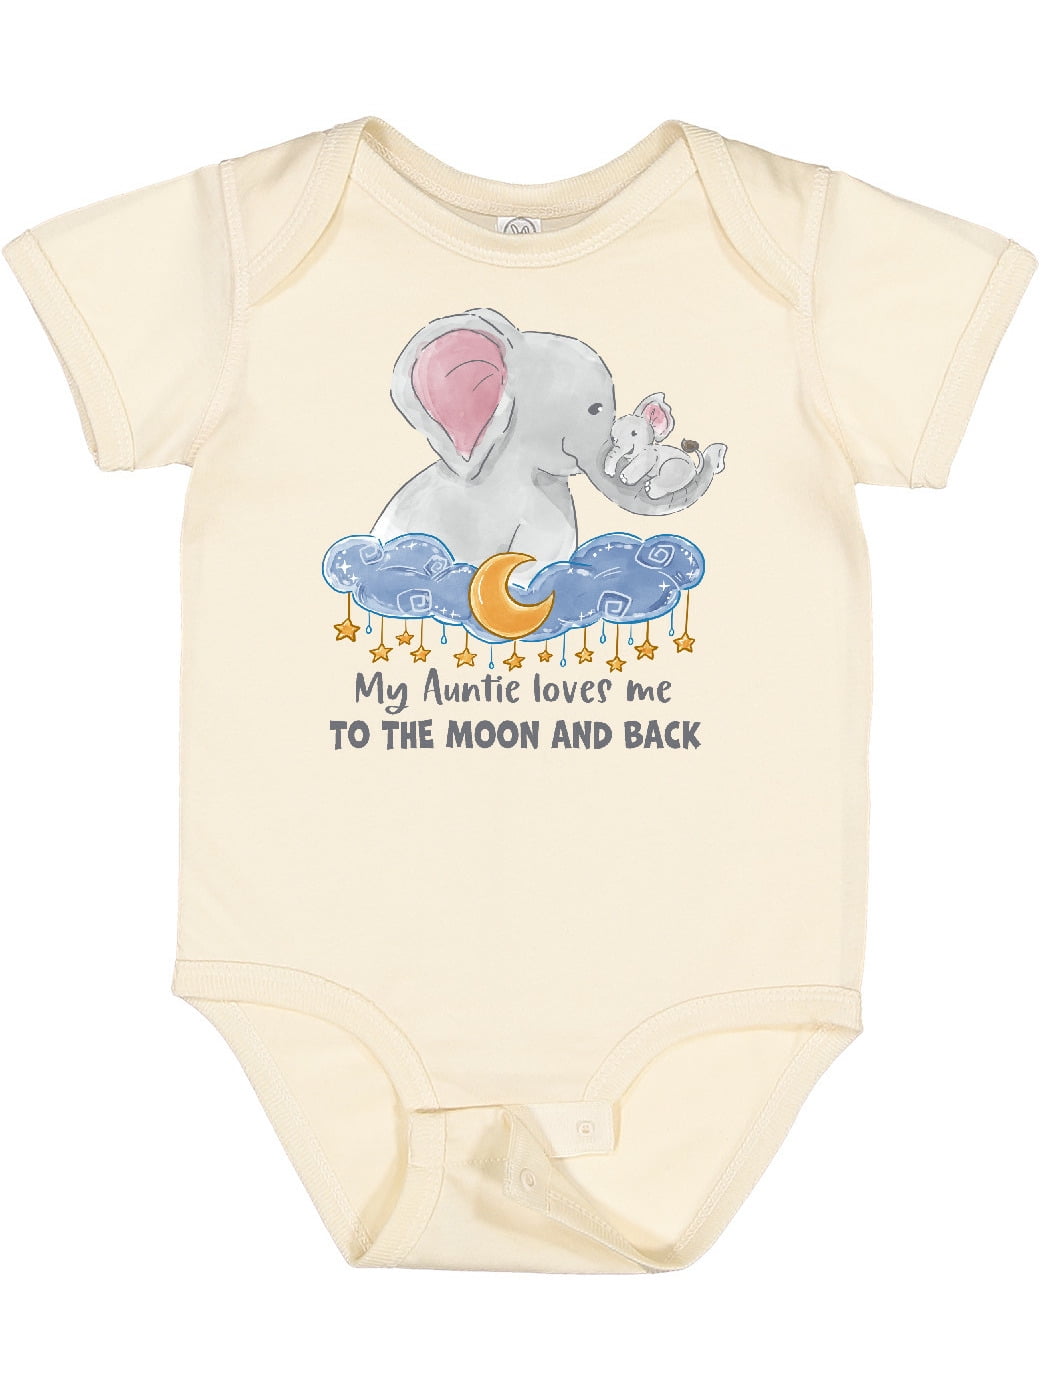 My Auntie Love Me To The Moon and Back Bodysuit Baby Vest Cute Boys Girls Gift 